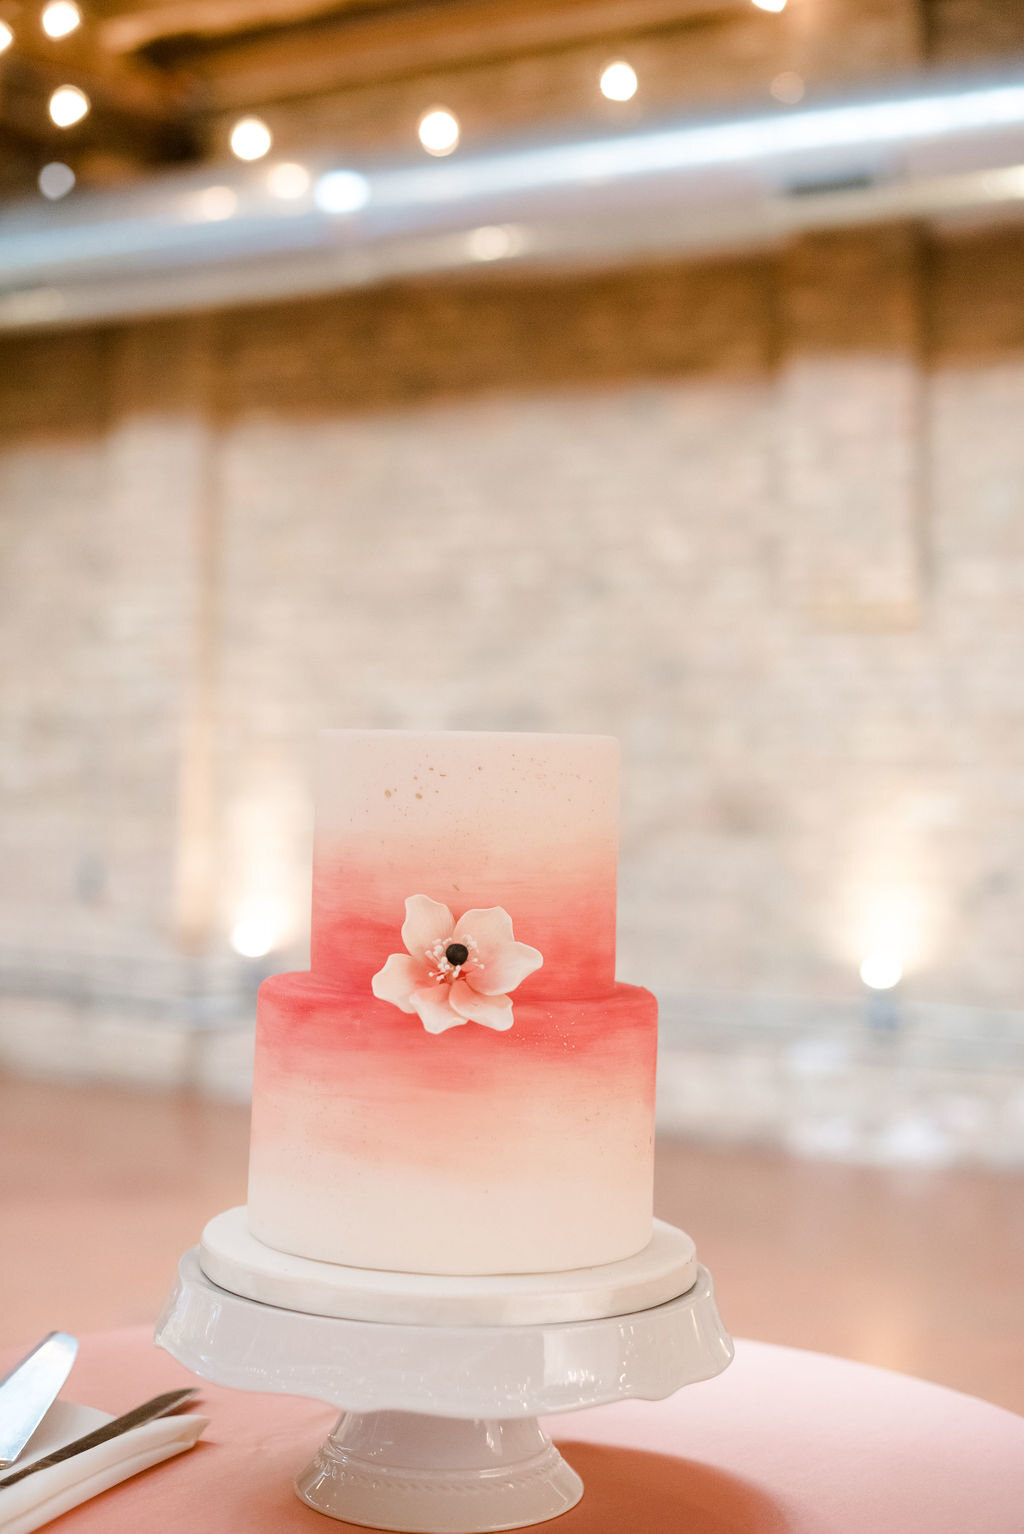 A white and pink ombre style wedding cake